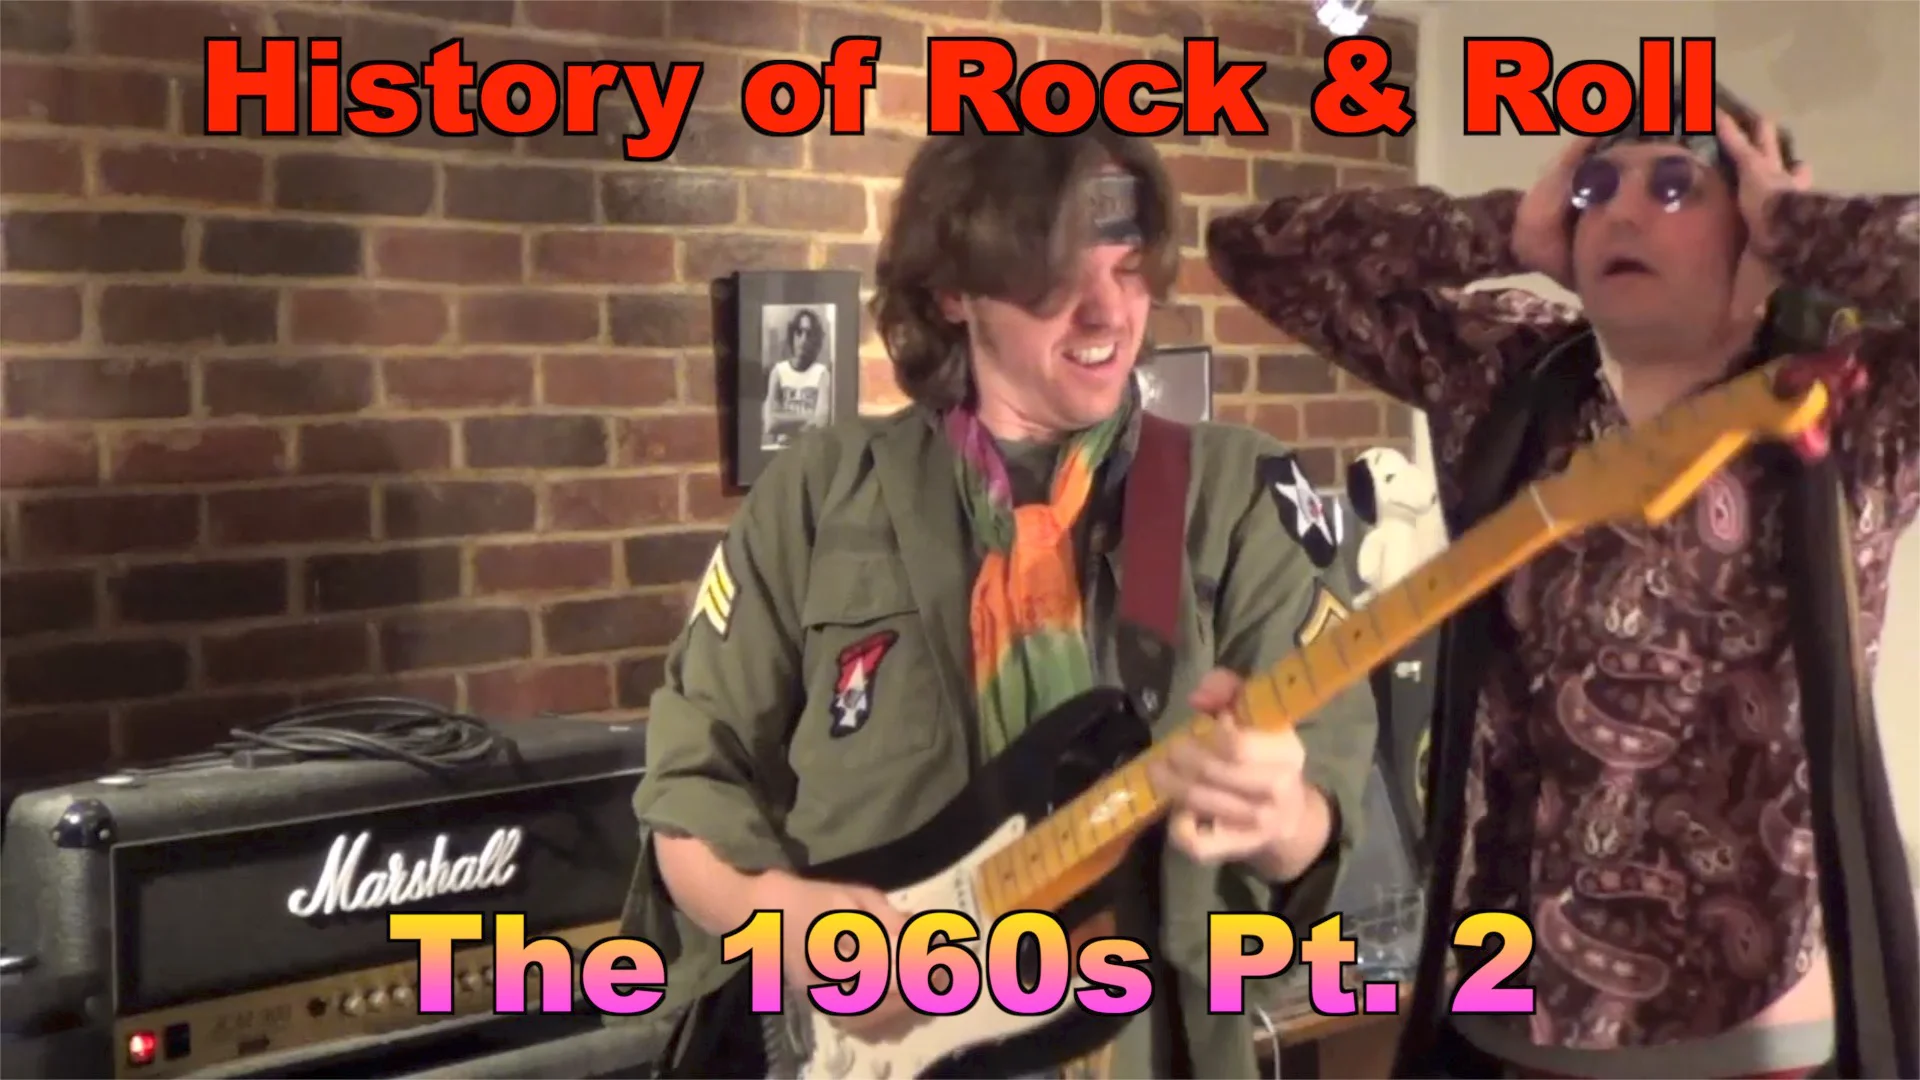 History of Rock & Roll - The 1980s (The  edit) on Vimeo